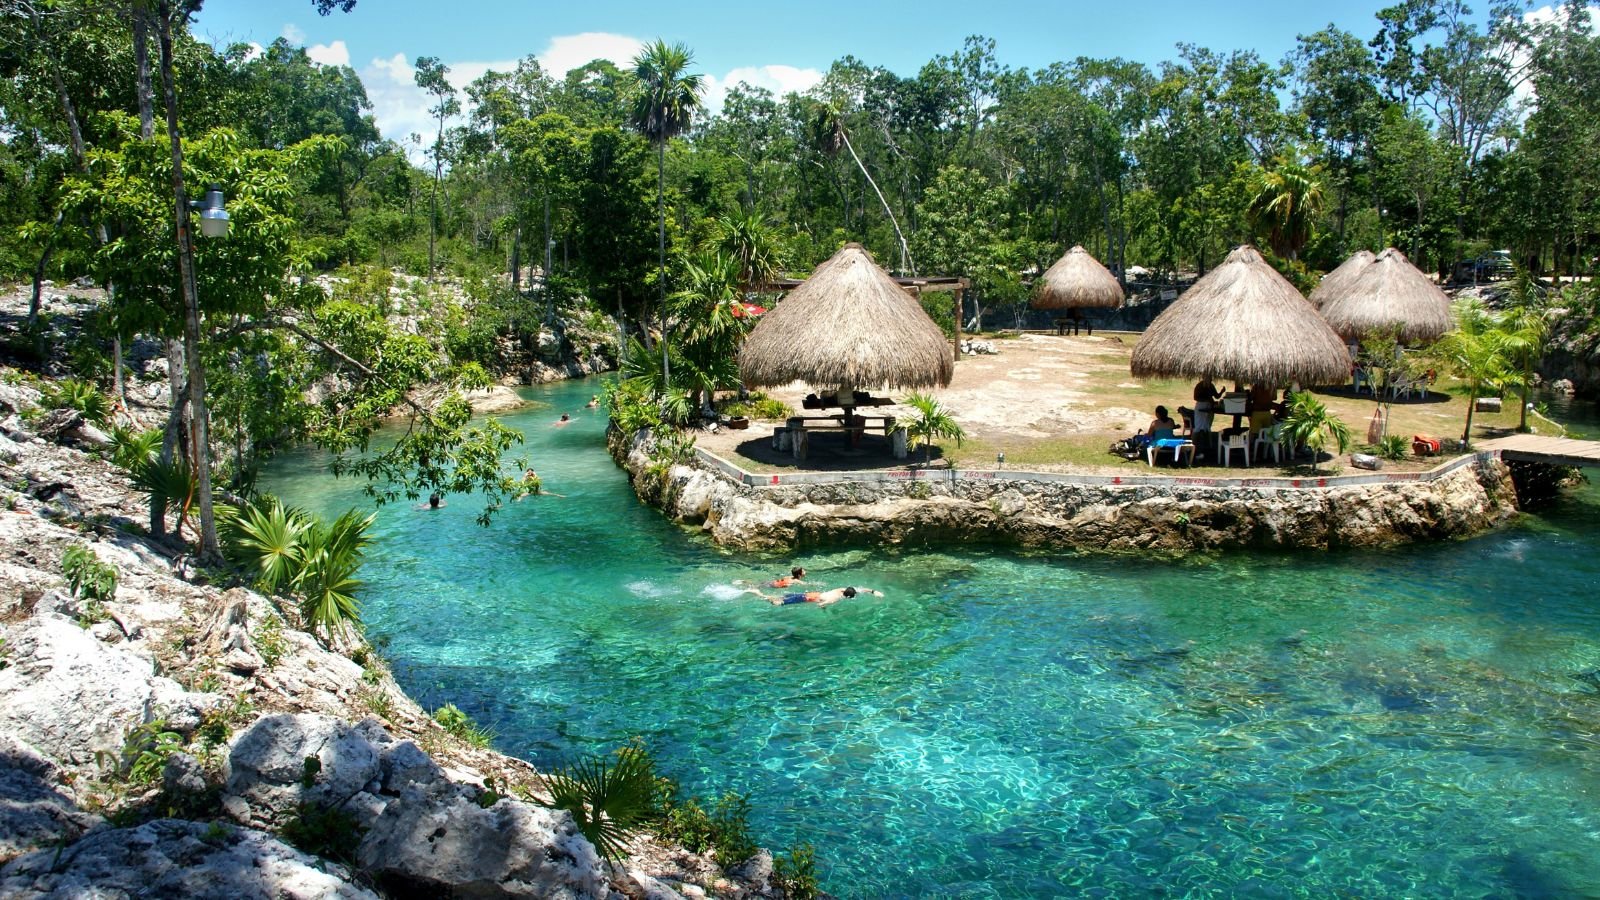 <p>Tulum is one of the largest cities built by the Maya. It offers a Caribbean lifestyle without island living. It takes two hours by car to get to the city’s major airport. The city is economical since the average living cost is between <a href="https://bucketlistbri.com/cost-of-living-in-tulum-mexico/#:~:text=to%20check%20out.-,Total%20Monthly%20Cost%20to%20Live%20in%20Tulum%20Mexico,your%20housing%20situation%20and%20lifestyle." rel="noopener">$1,500 to $2,500</a>, making it affordable. The town is divided by a coastal highway, with the beach just a stone’s throw away. Tulum has become popular among expats, especially divers and yoga enthusiasts.</p>